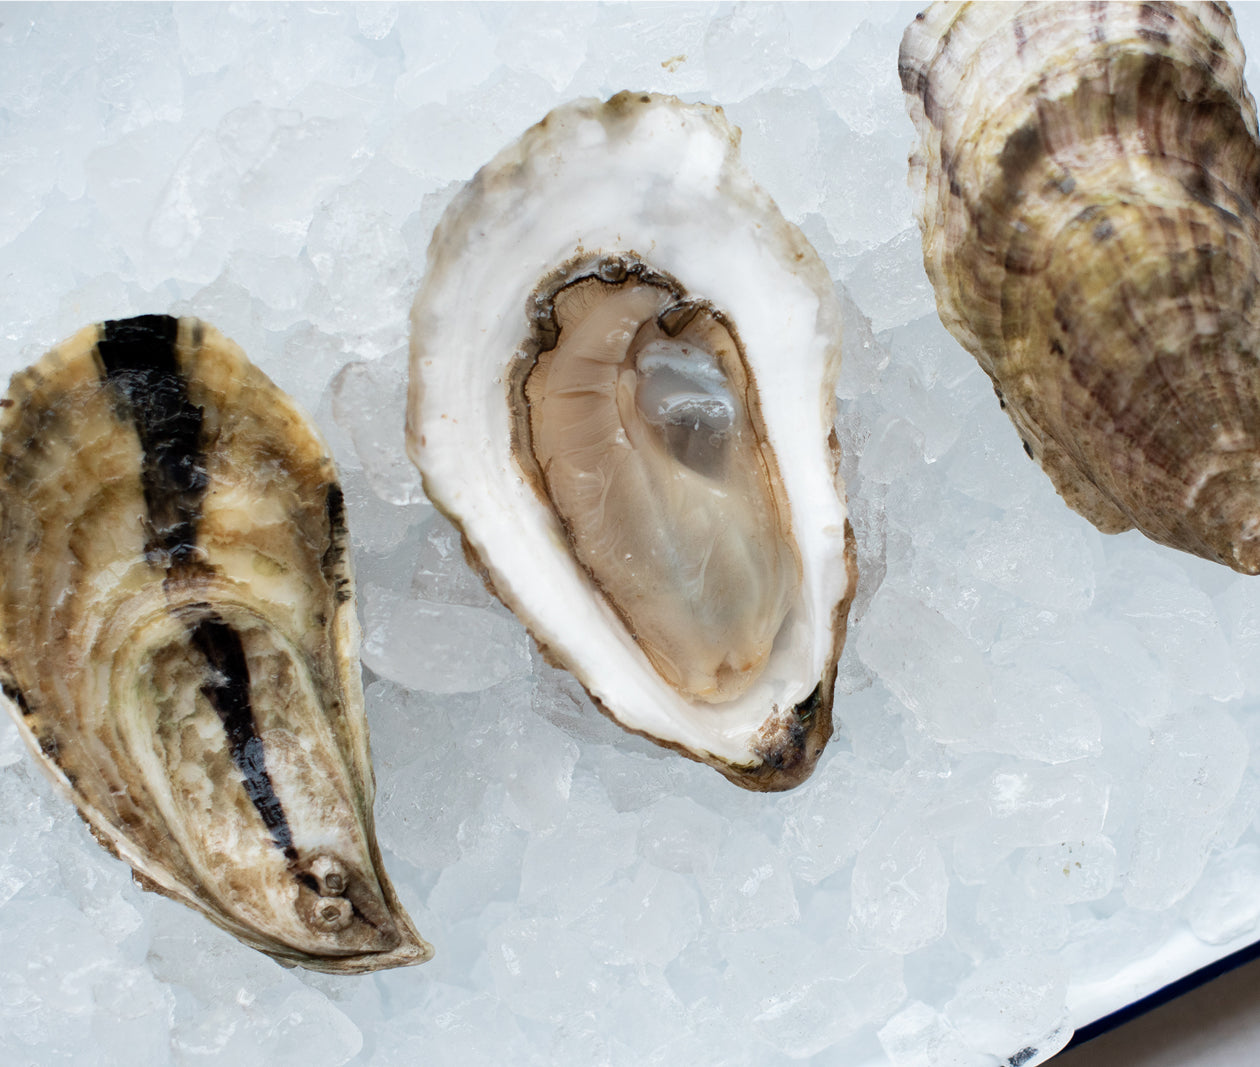 Mill Creek Oysters from Yarmouthport, MA